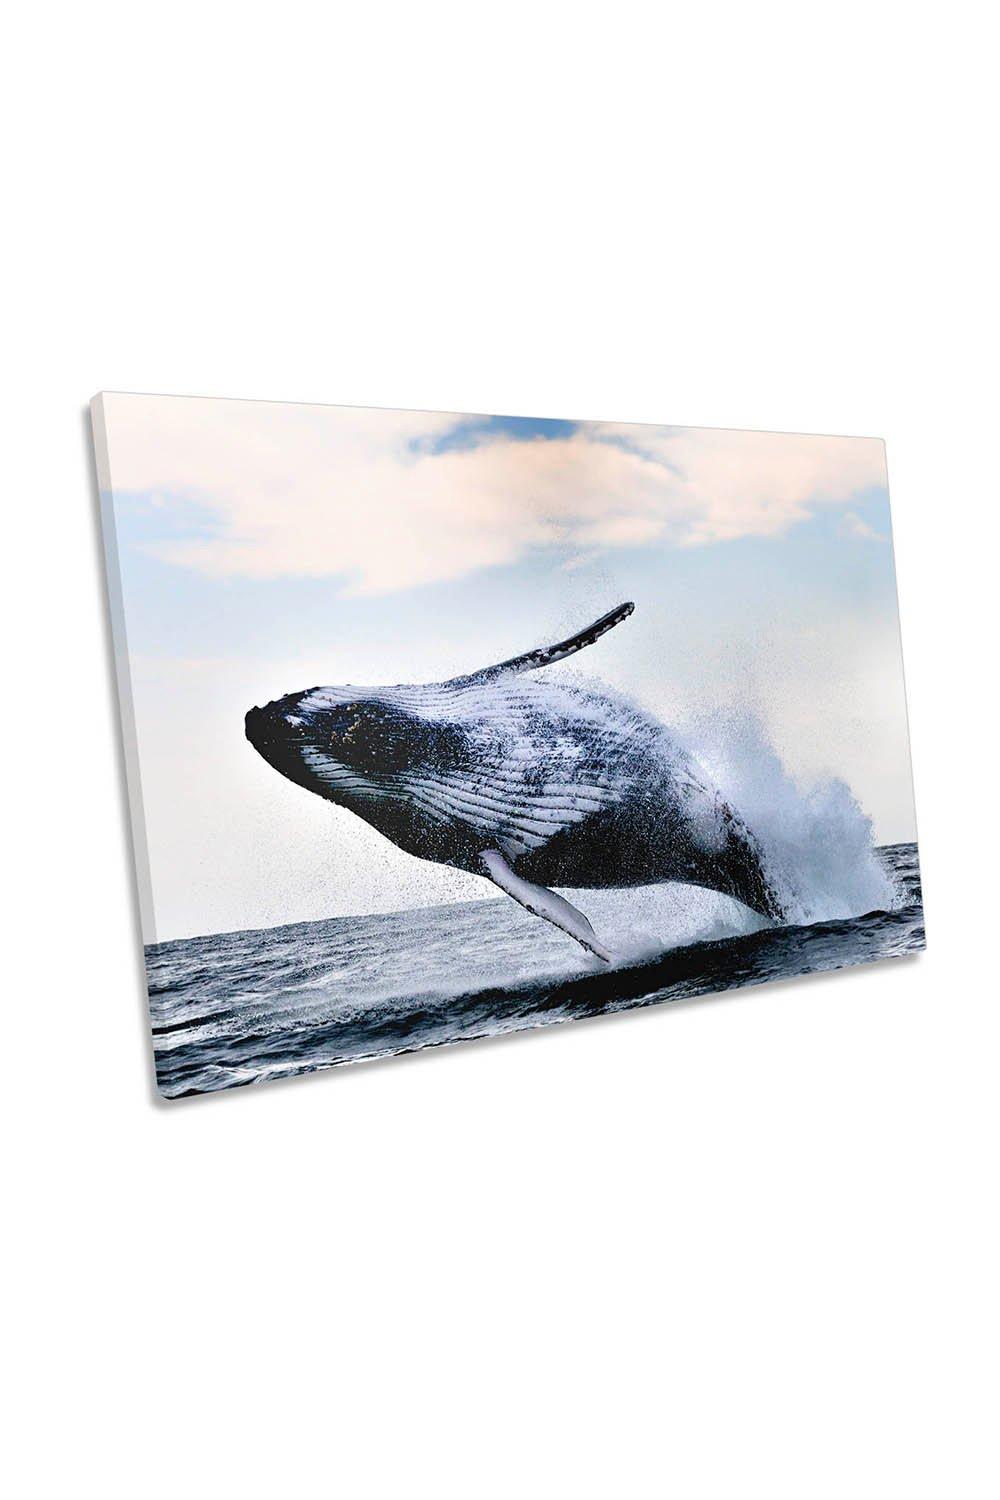 The Breach Humpback Whale Canvas Wall Art Picture Print